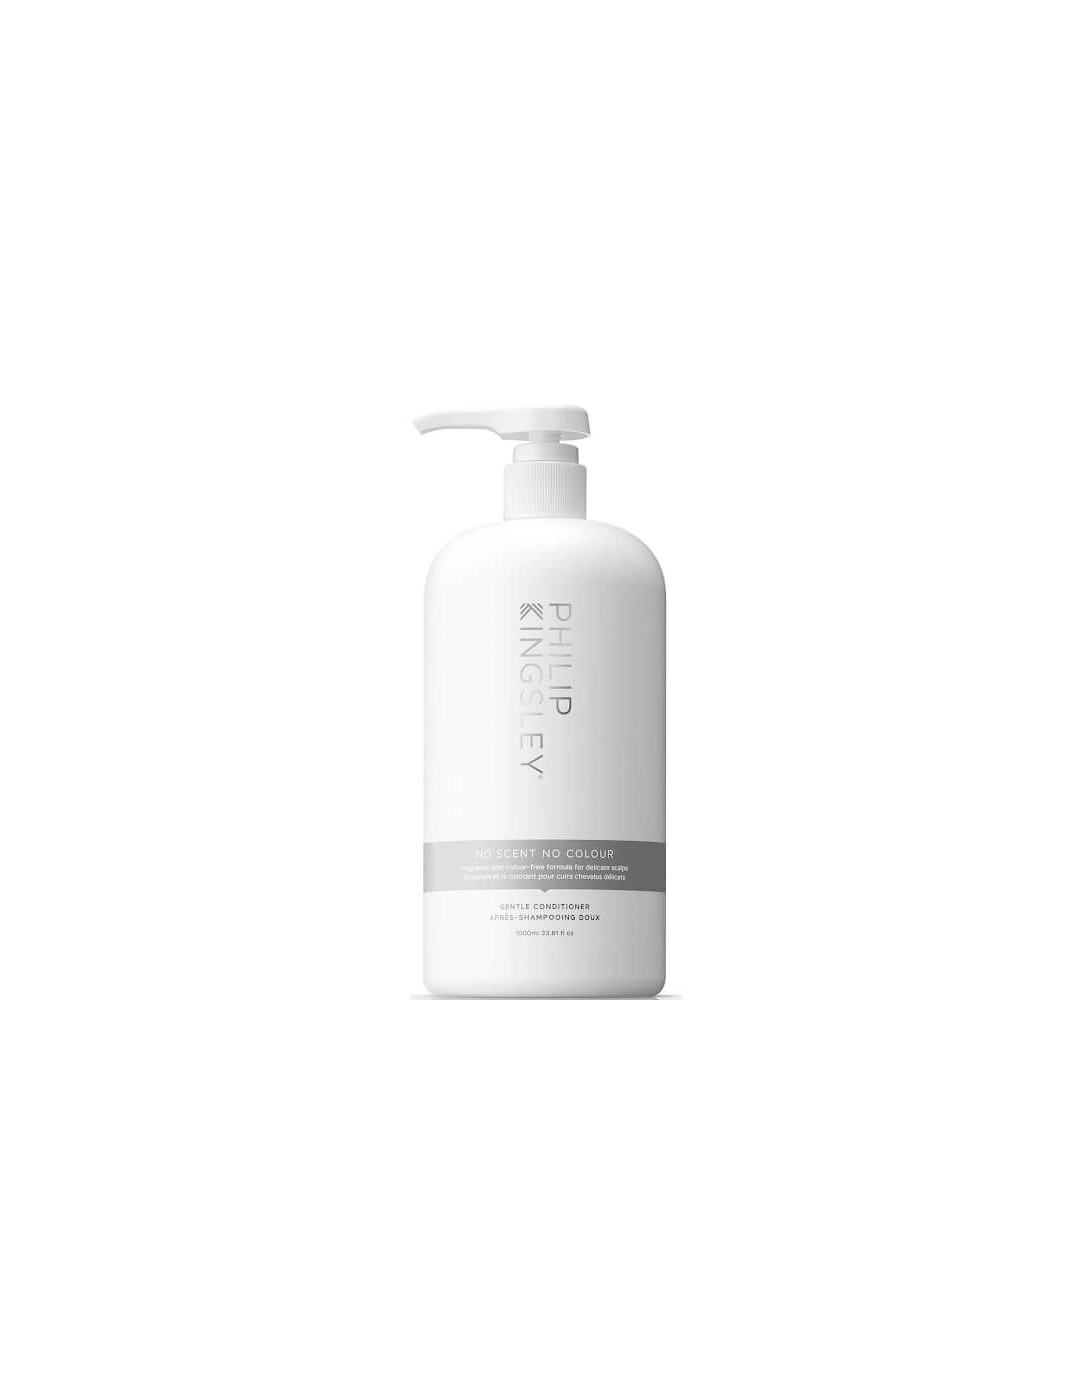 No Scent No Colour Gentle Conditioner 1000ml (Worth £120.00) - Philip Kingsley, 2 of 1